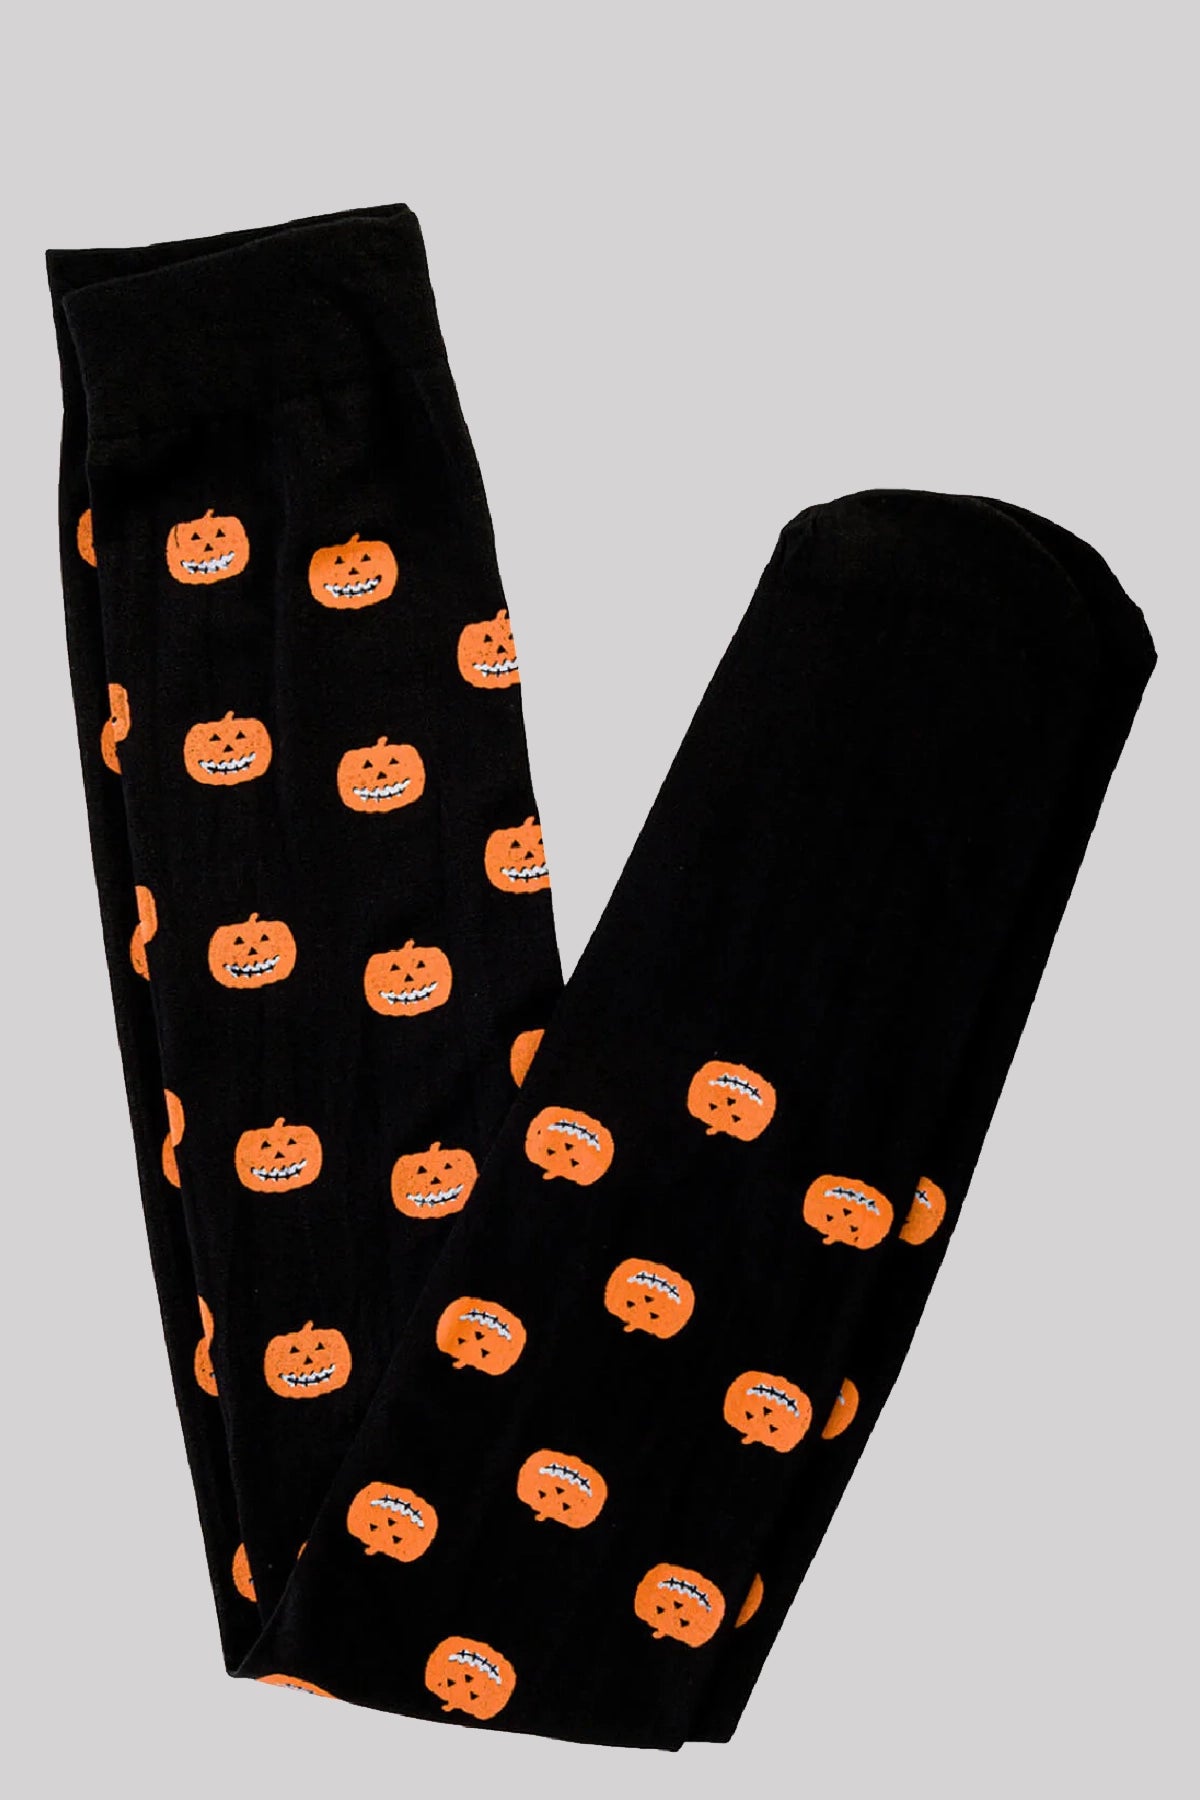 Banned Pumpkin Spice Over The Knee Socks Halloween Stockings, Black, One-Size